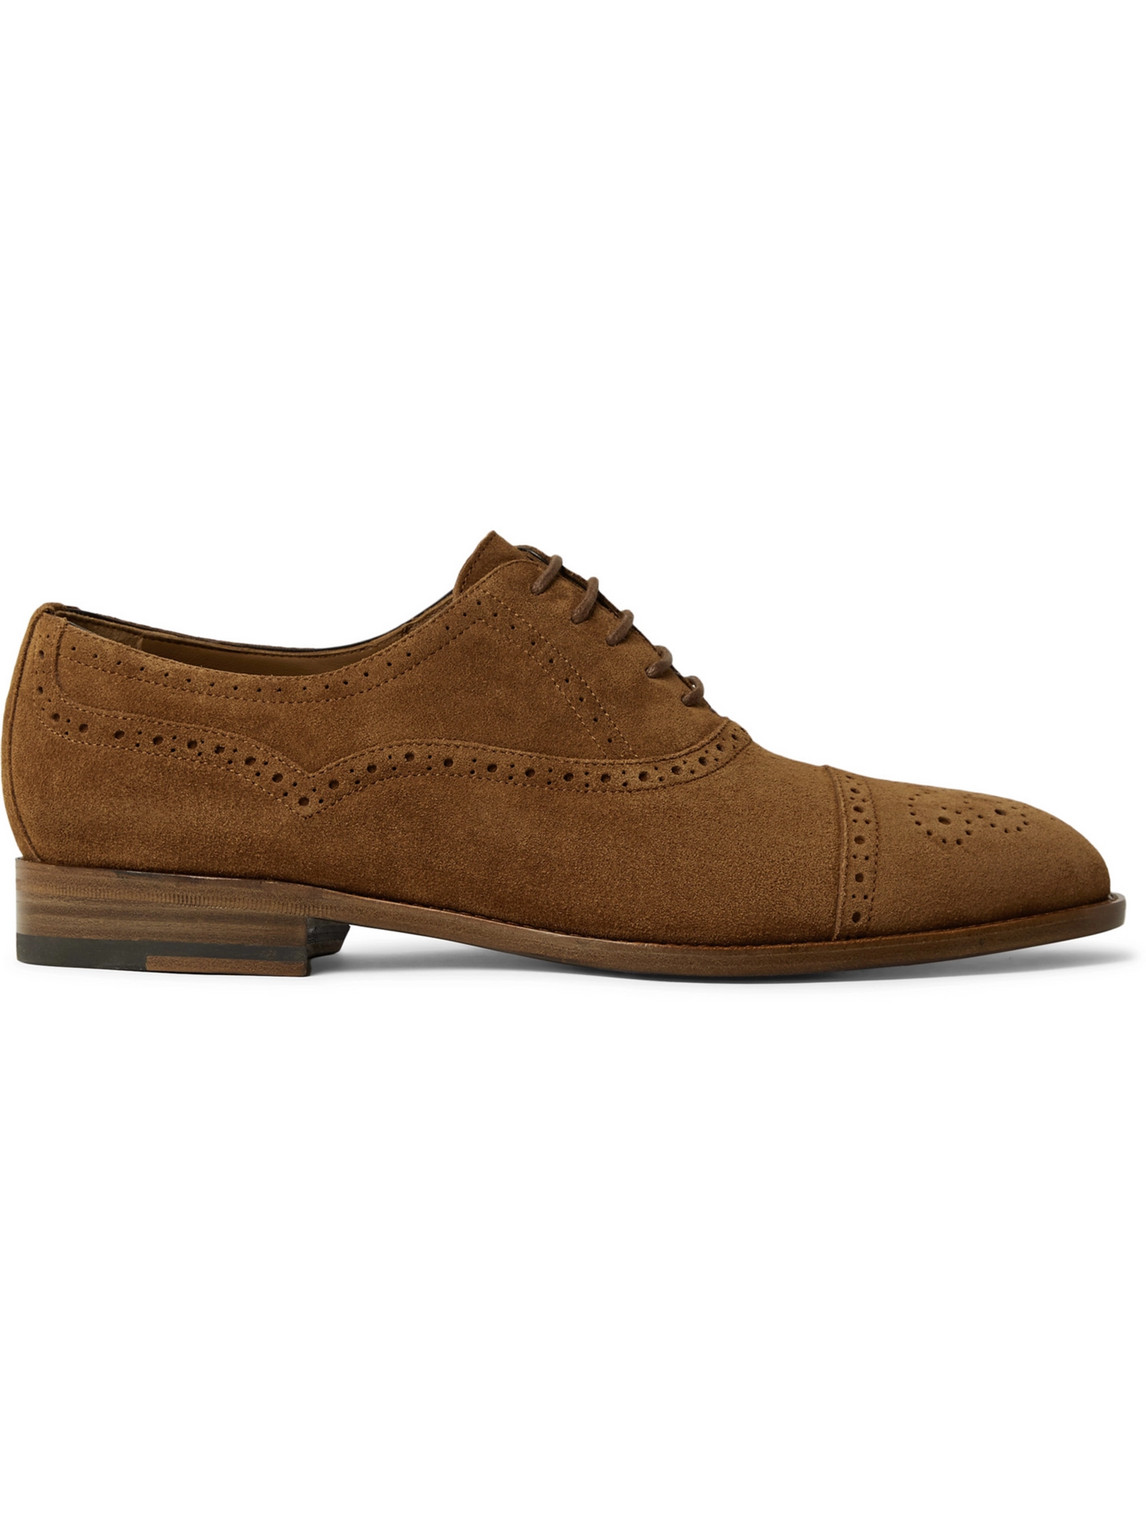 Witney Suede Oxford Brogues